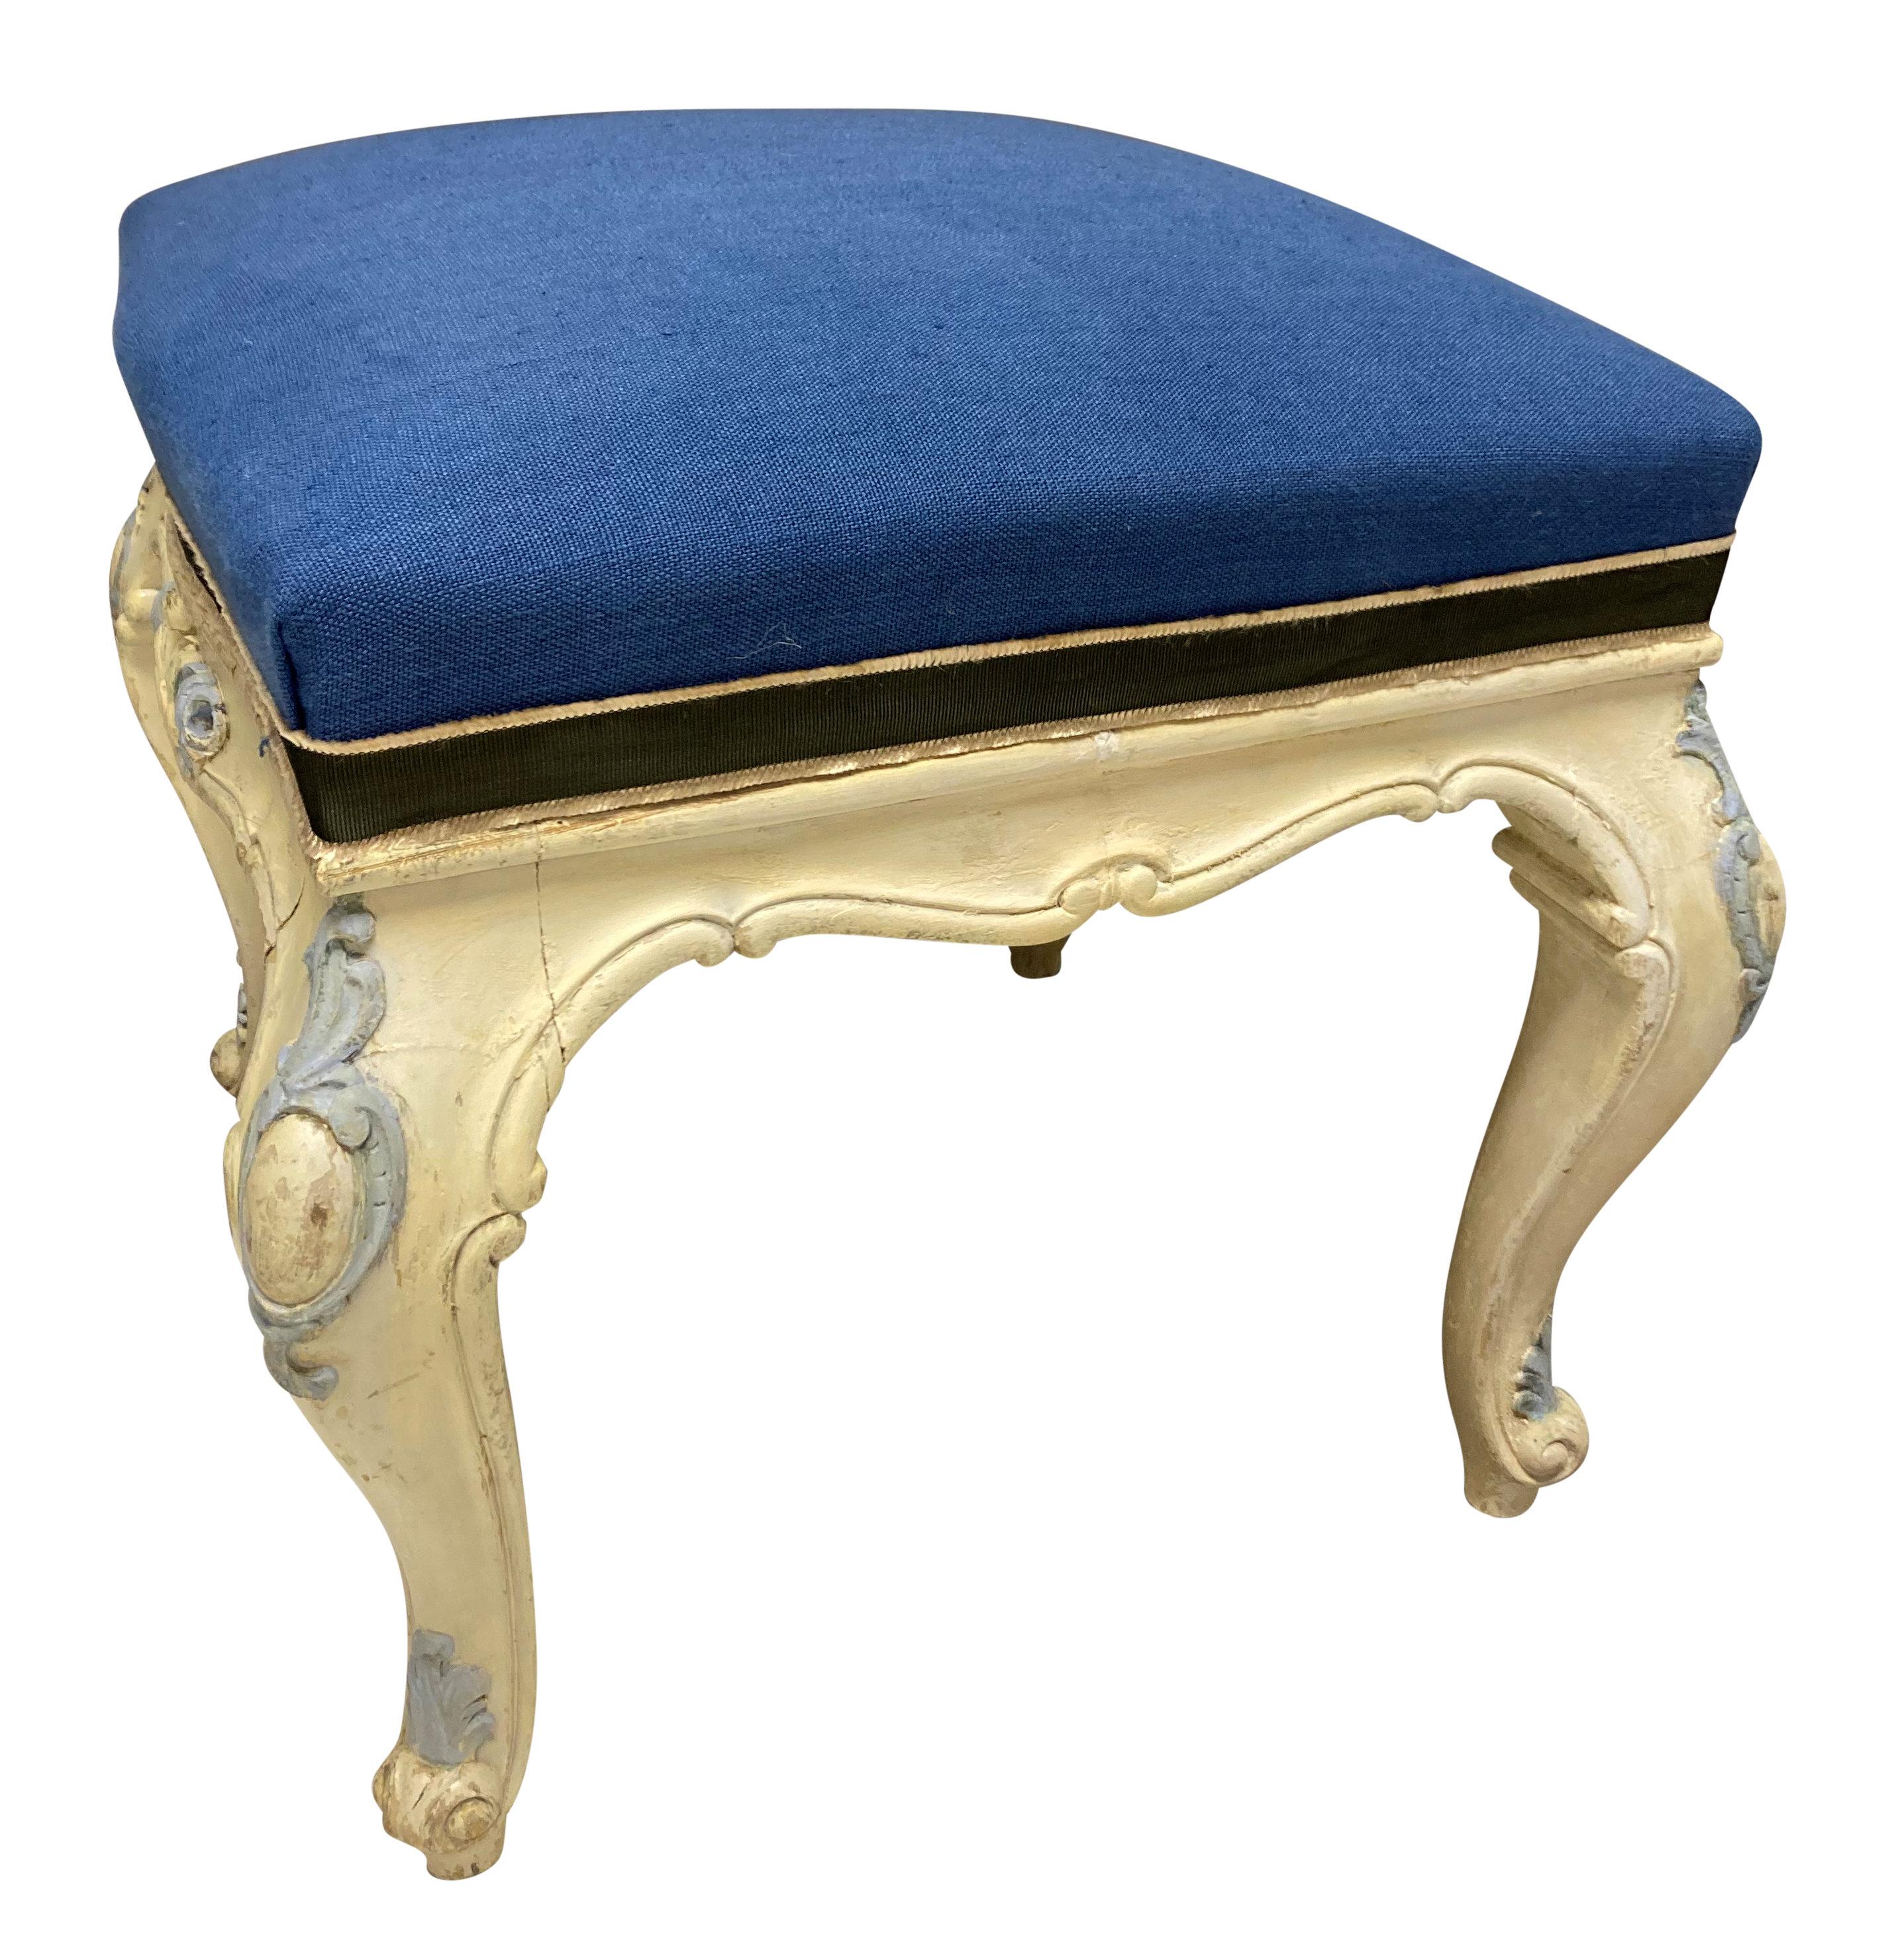 A pair of French Louis XV style carved and painted stools in very pale yellow and cornflower blue paints, newly upholstered in blue linen with sage and cream silk fringed ribbon.